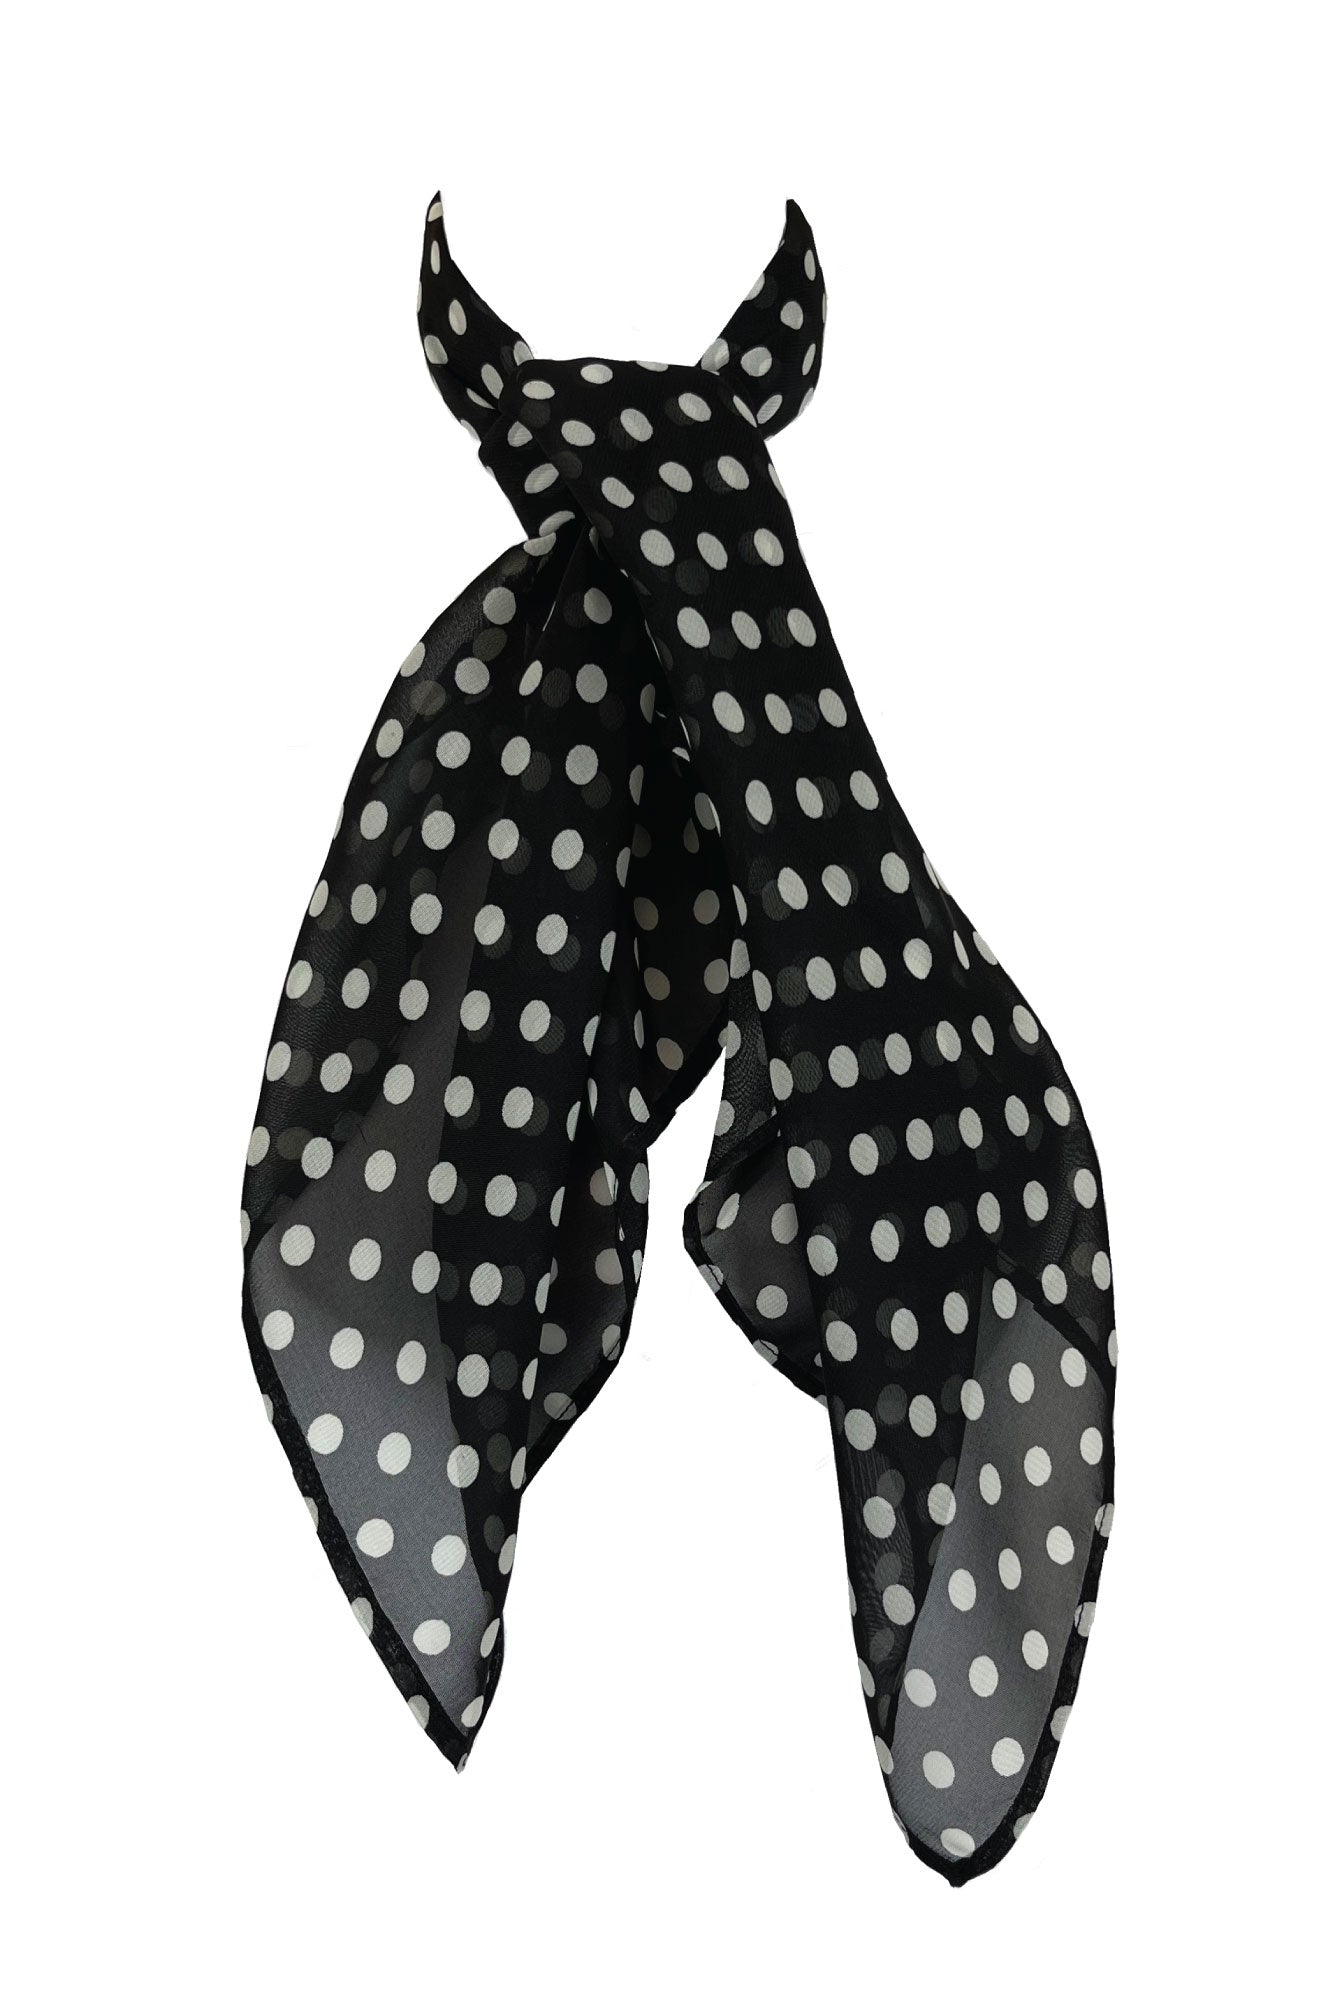 Scarf in Black with White Polka Dots